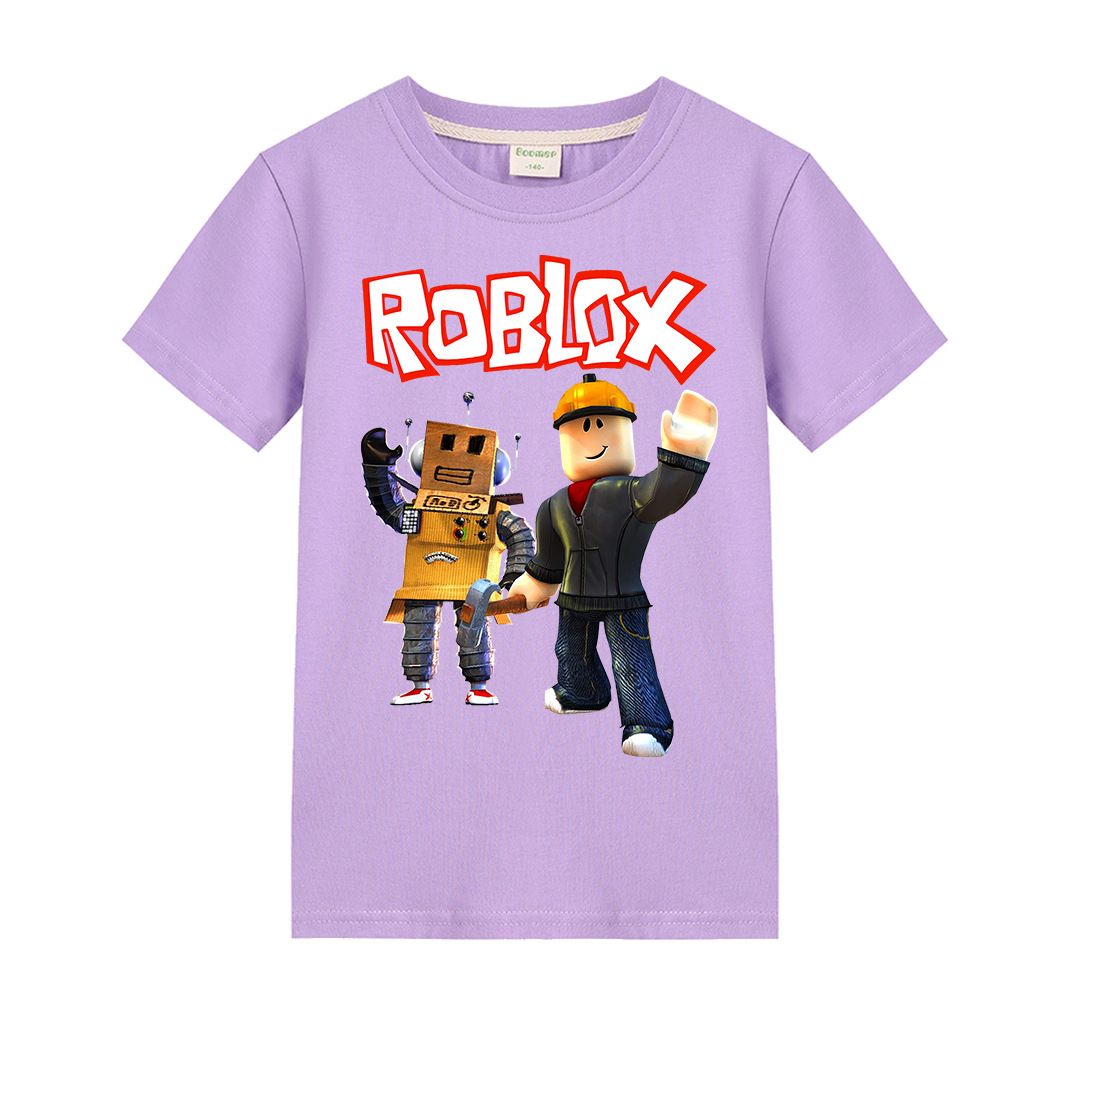 2020 100 Cotton Boys Designer T Shirt Fashion Girls Short Sleeves Roblox High Quality Black T Shirt Tees Size 4 6 8 9 From Baby0512 13 77 Dhgate Com - details about chic new kids boys 3d game roblox short sleeve t shirts tops 6 14 years 8444